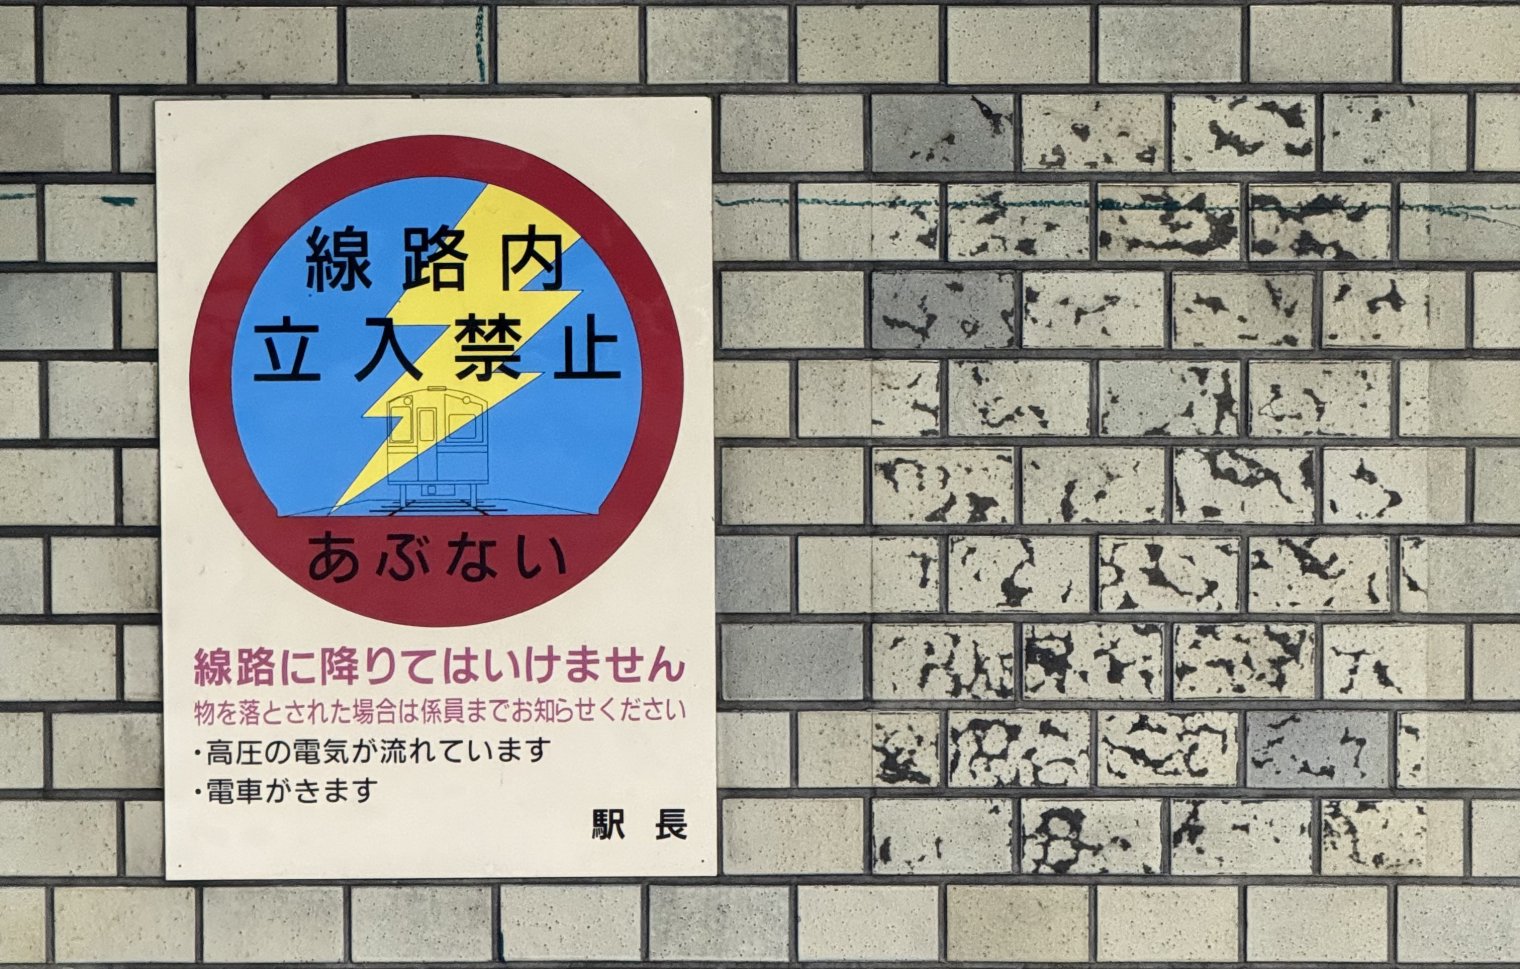 A warning sign on the wall of a subway in Osaka, next to the remnants of another sign that was removed at some point in the last 50 years